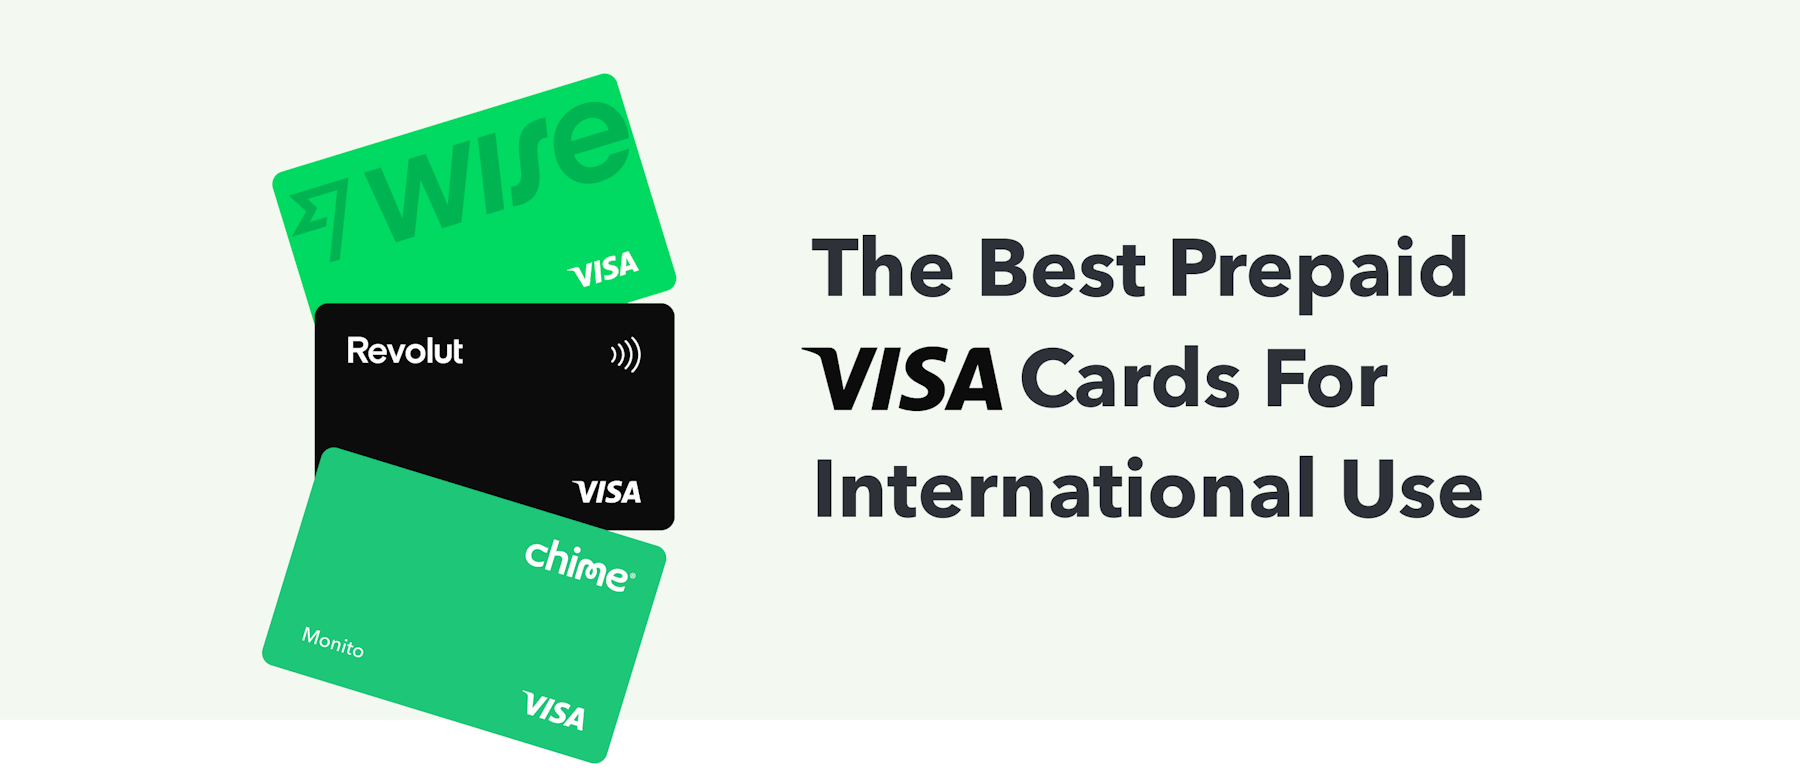 The Best Prepaid VISA Cards For International Use